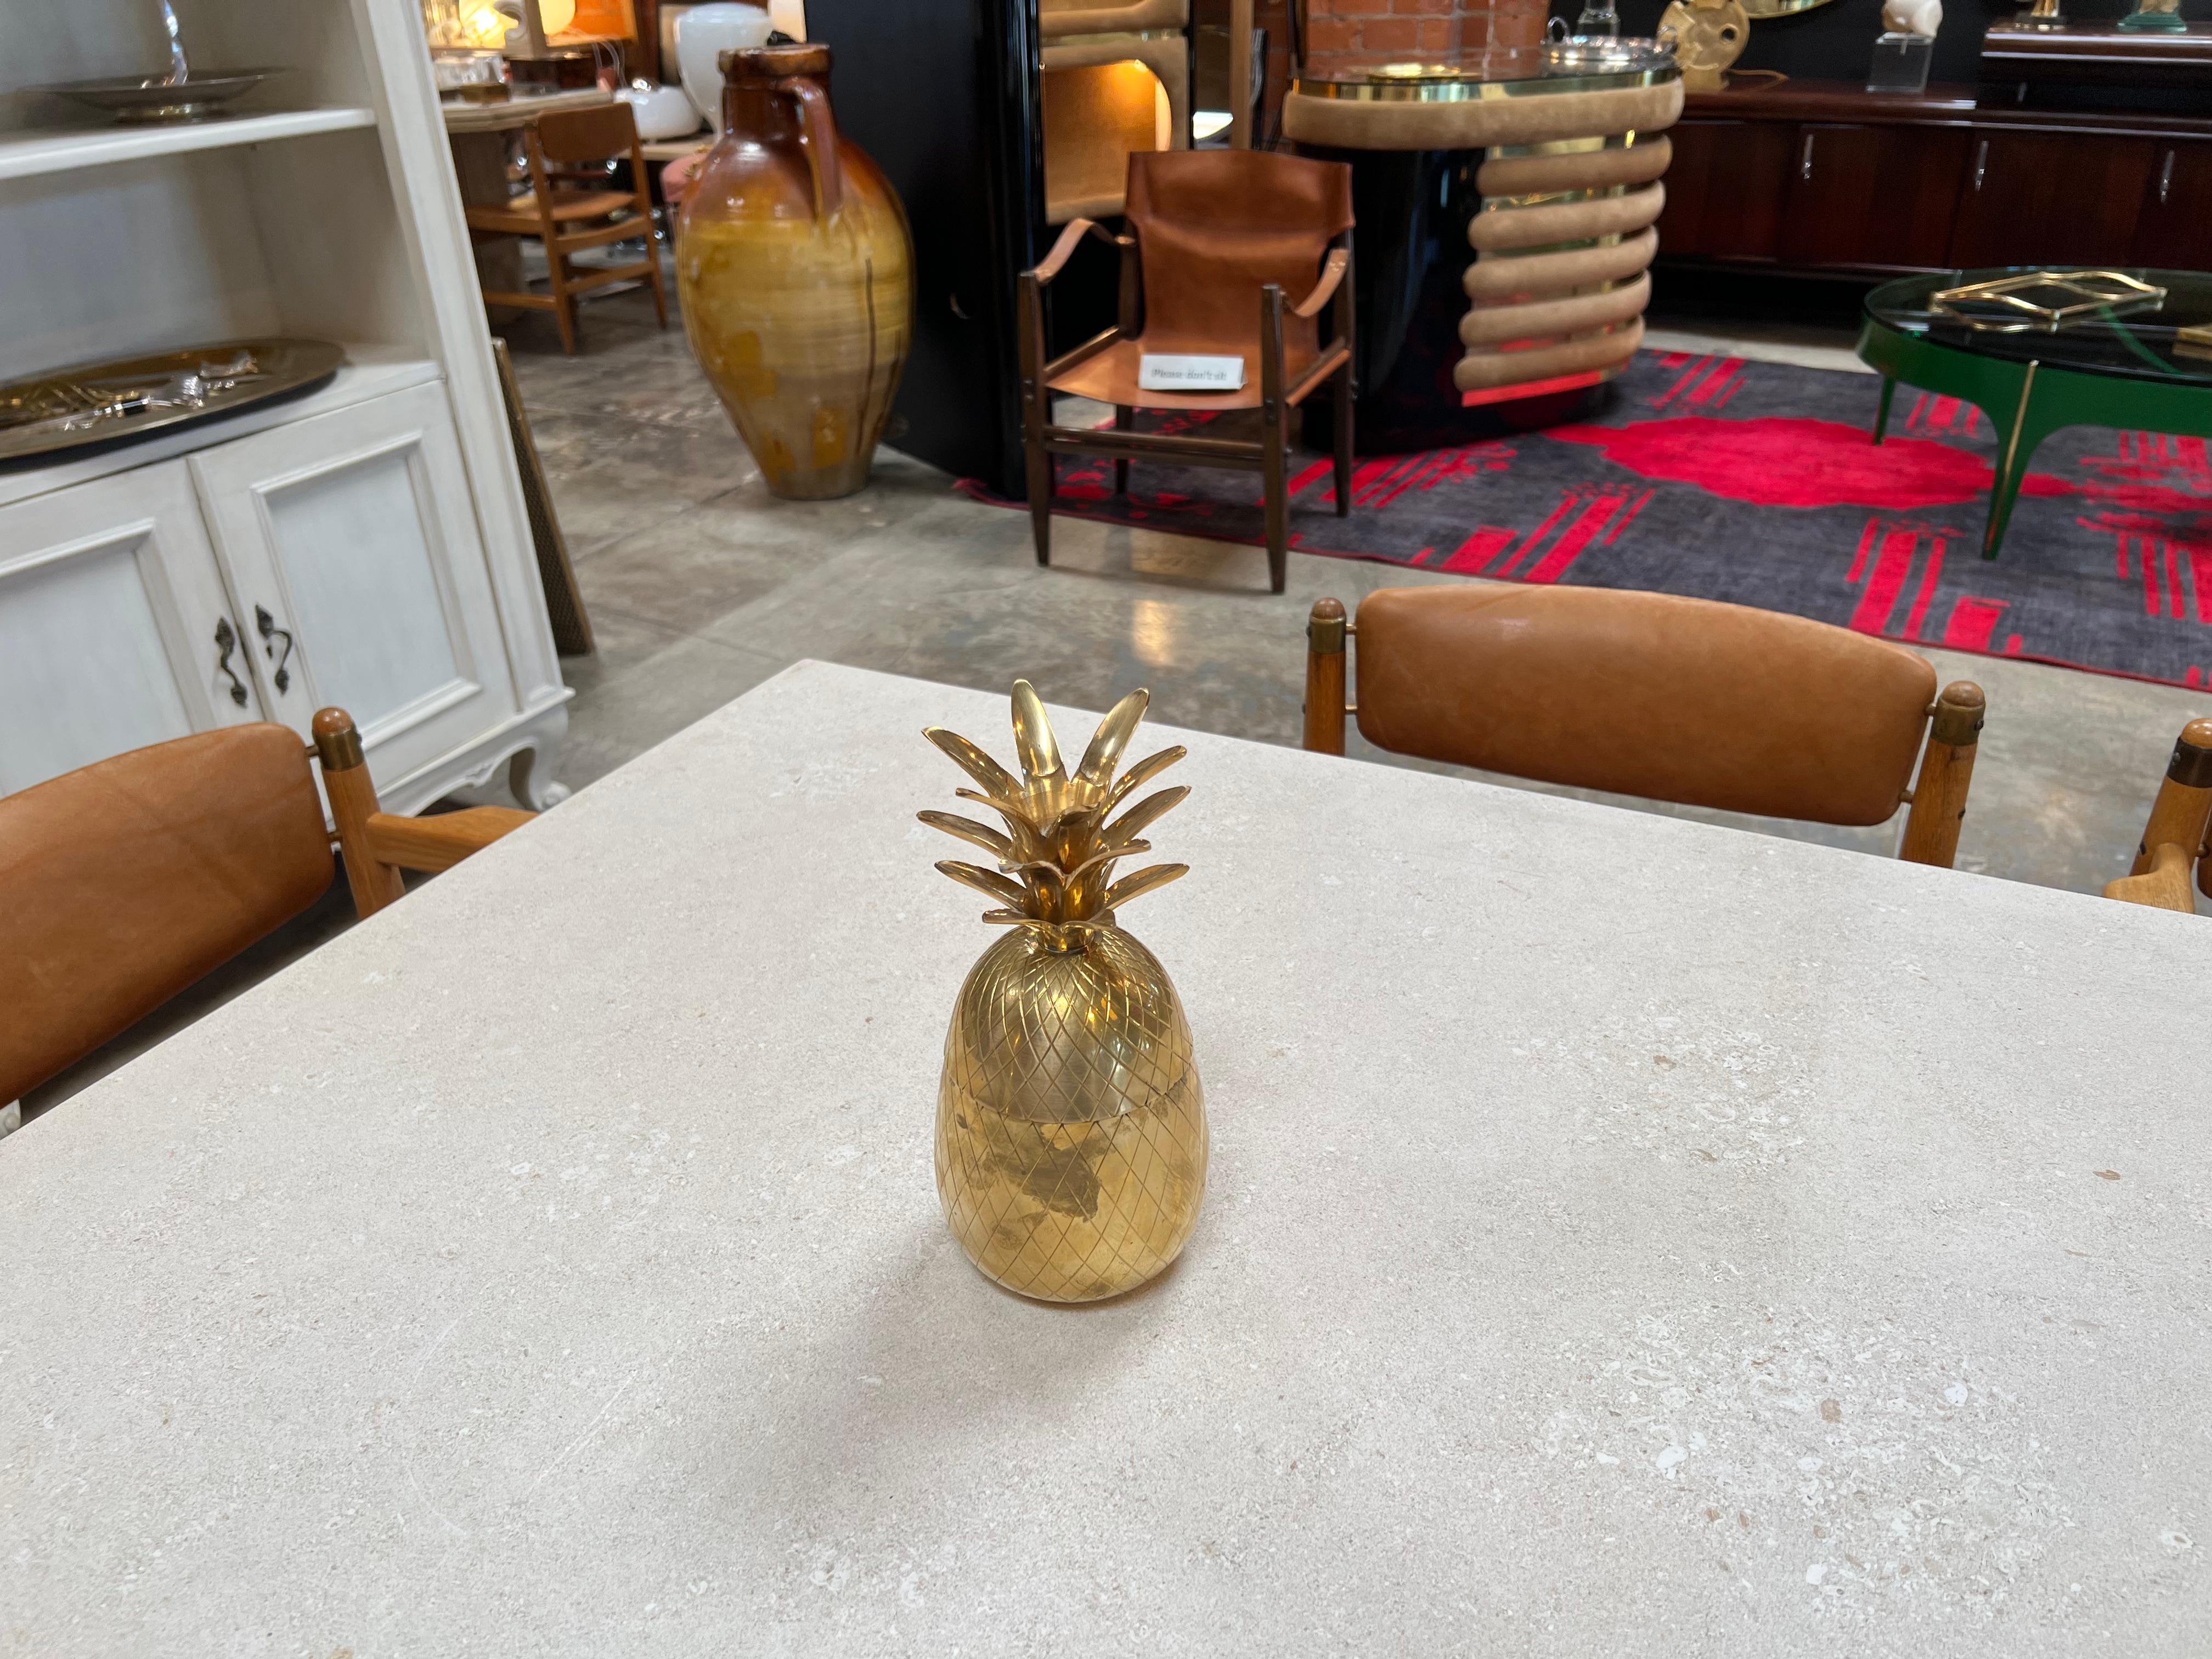 The Vintage Italian Decorative Pineapple Brass Box from the 1970s is a charming and unique collectible. Crafted in Italy, this brass box is shaped like a pineapple, showcasing both artistic design and functionality. Its vintage appeal and